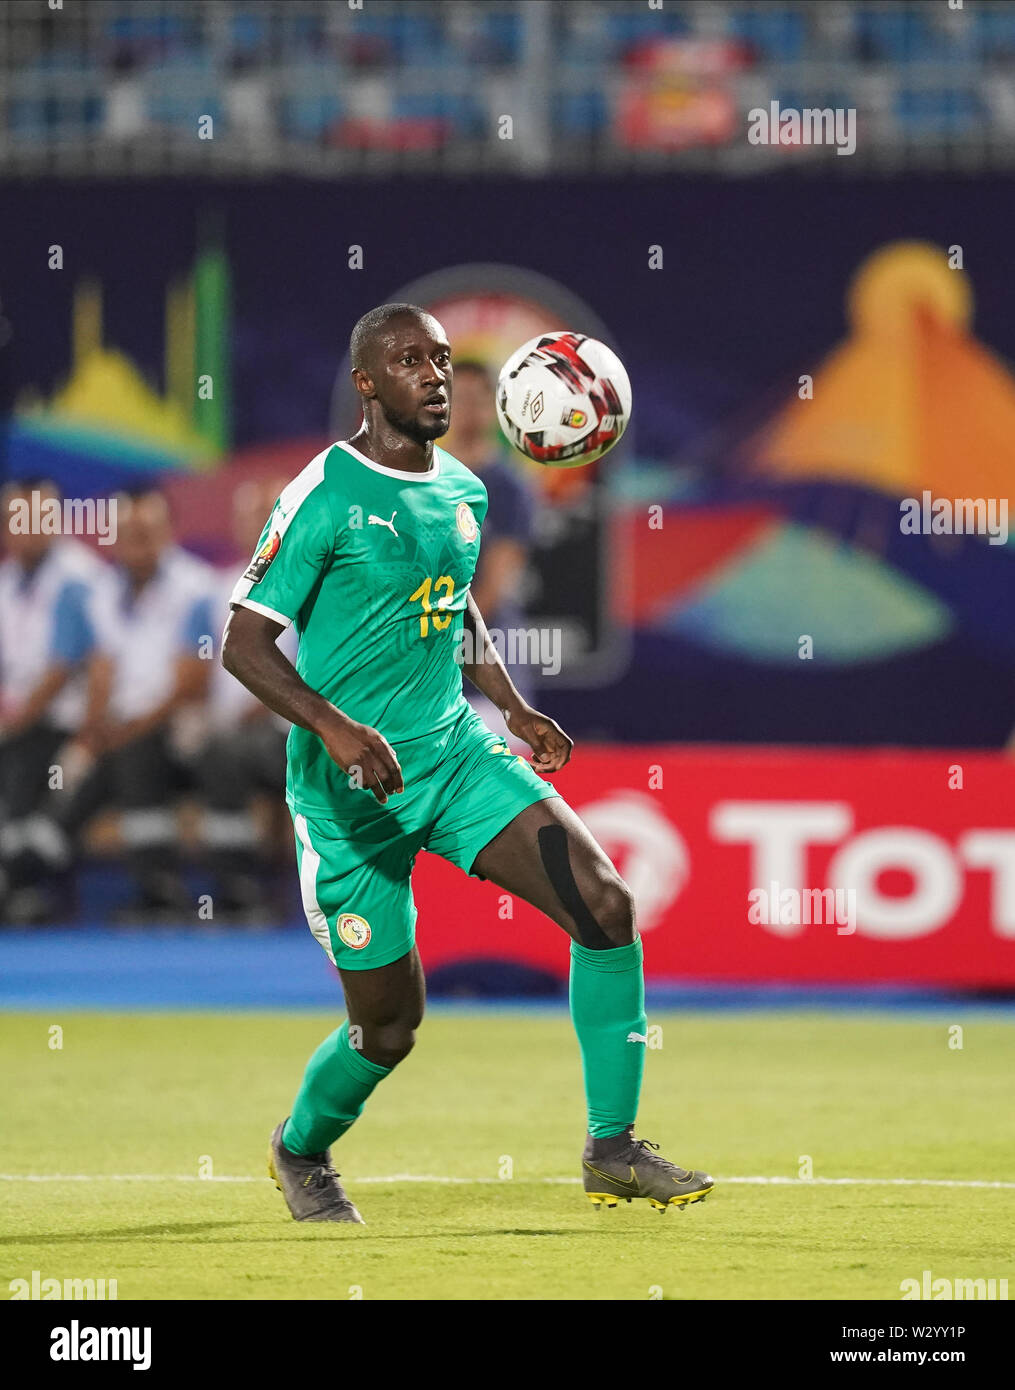 July 10, 2019 - Cairo, Senegal, Egypt - FRANCE OUT July 10, 2019: Alfred John Momar Ndiaye of Senegal during the 2019 African Cup of Nations match between Senegal and Benin at the 30 June Stadium in Cairo, Egypt. Ulrik Pedersen/CSM. Stock Photo